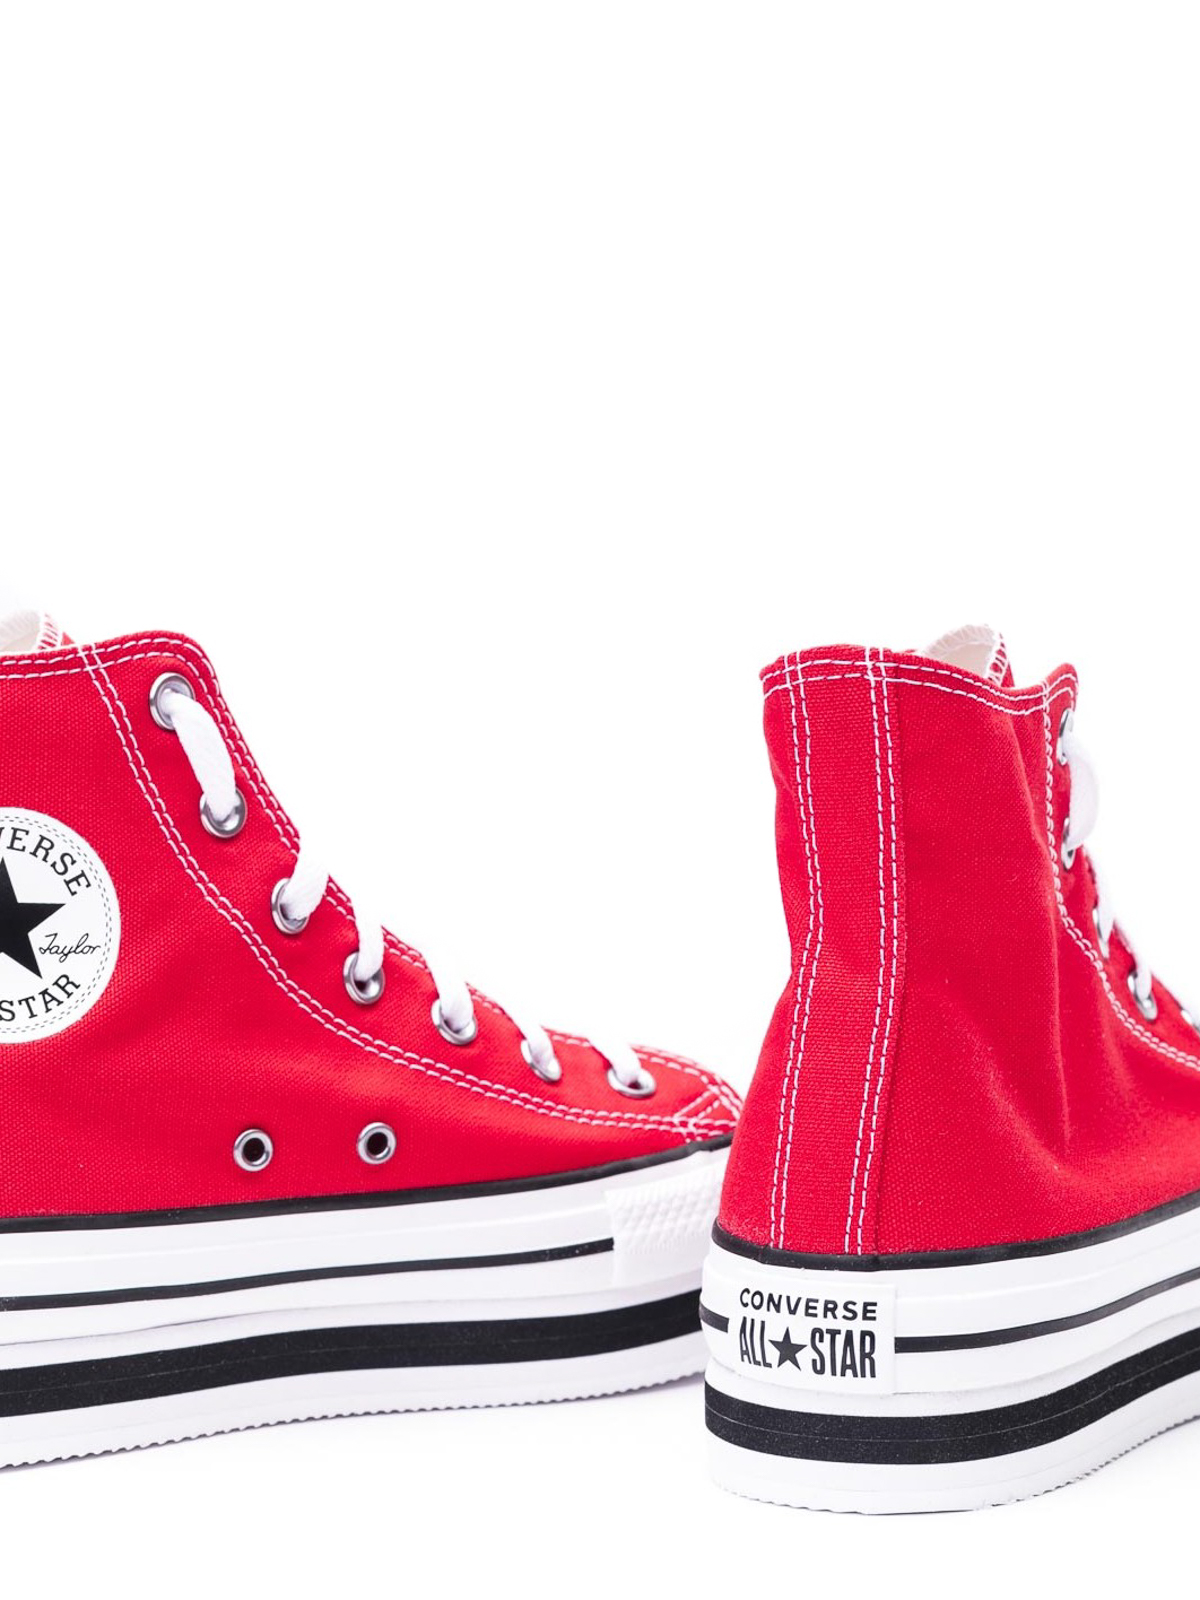 Trainers Converse - Chuck Taylor Platform red sneakers - 567996C625